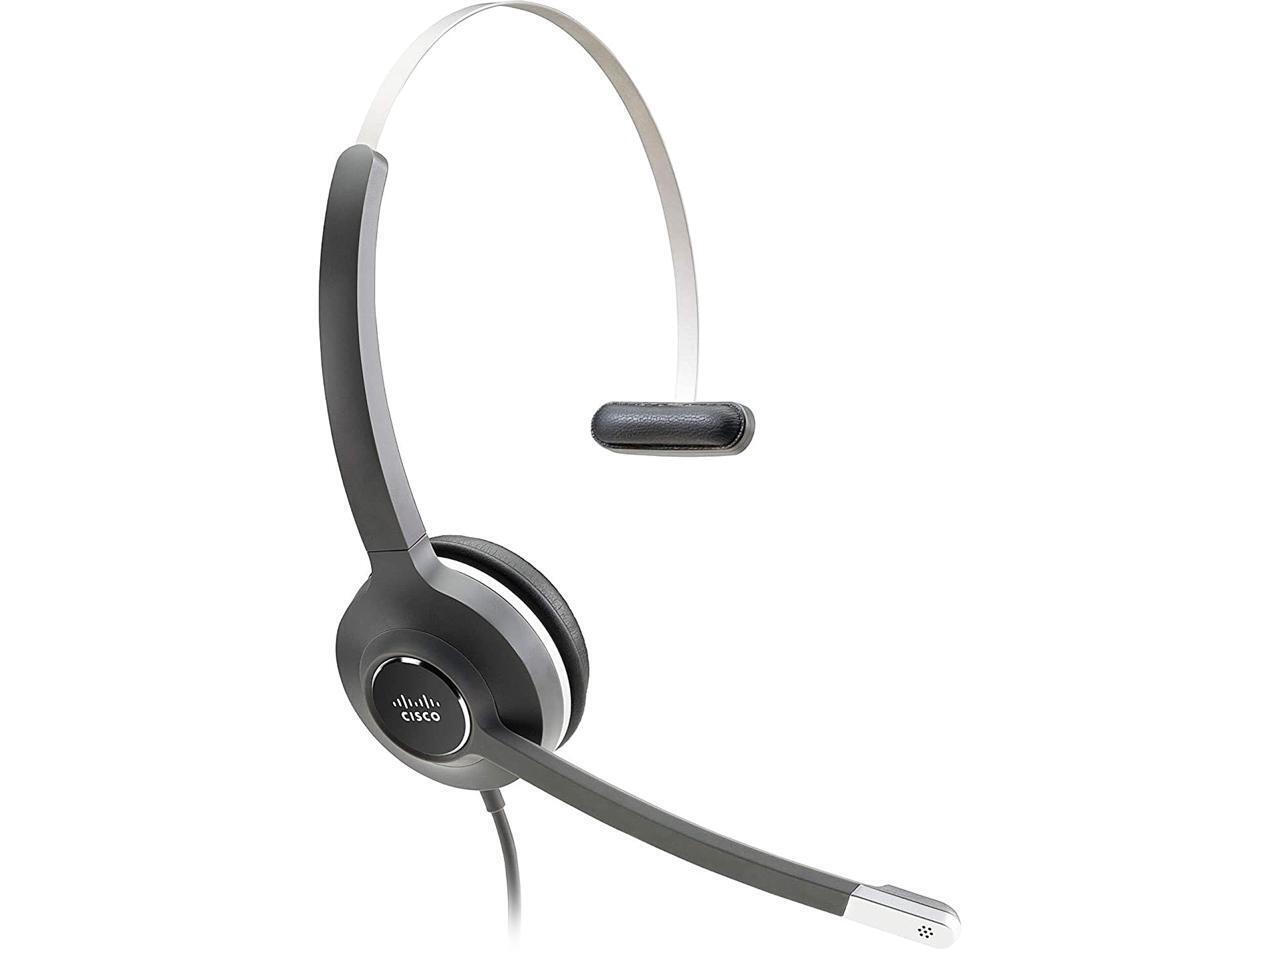 Cisco Headset 531 (Wired Single with USB Headset Adapter)